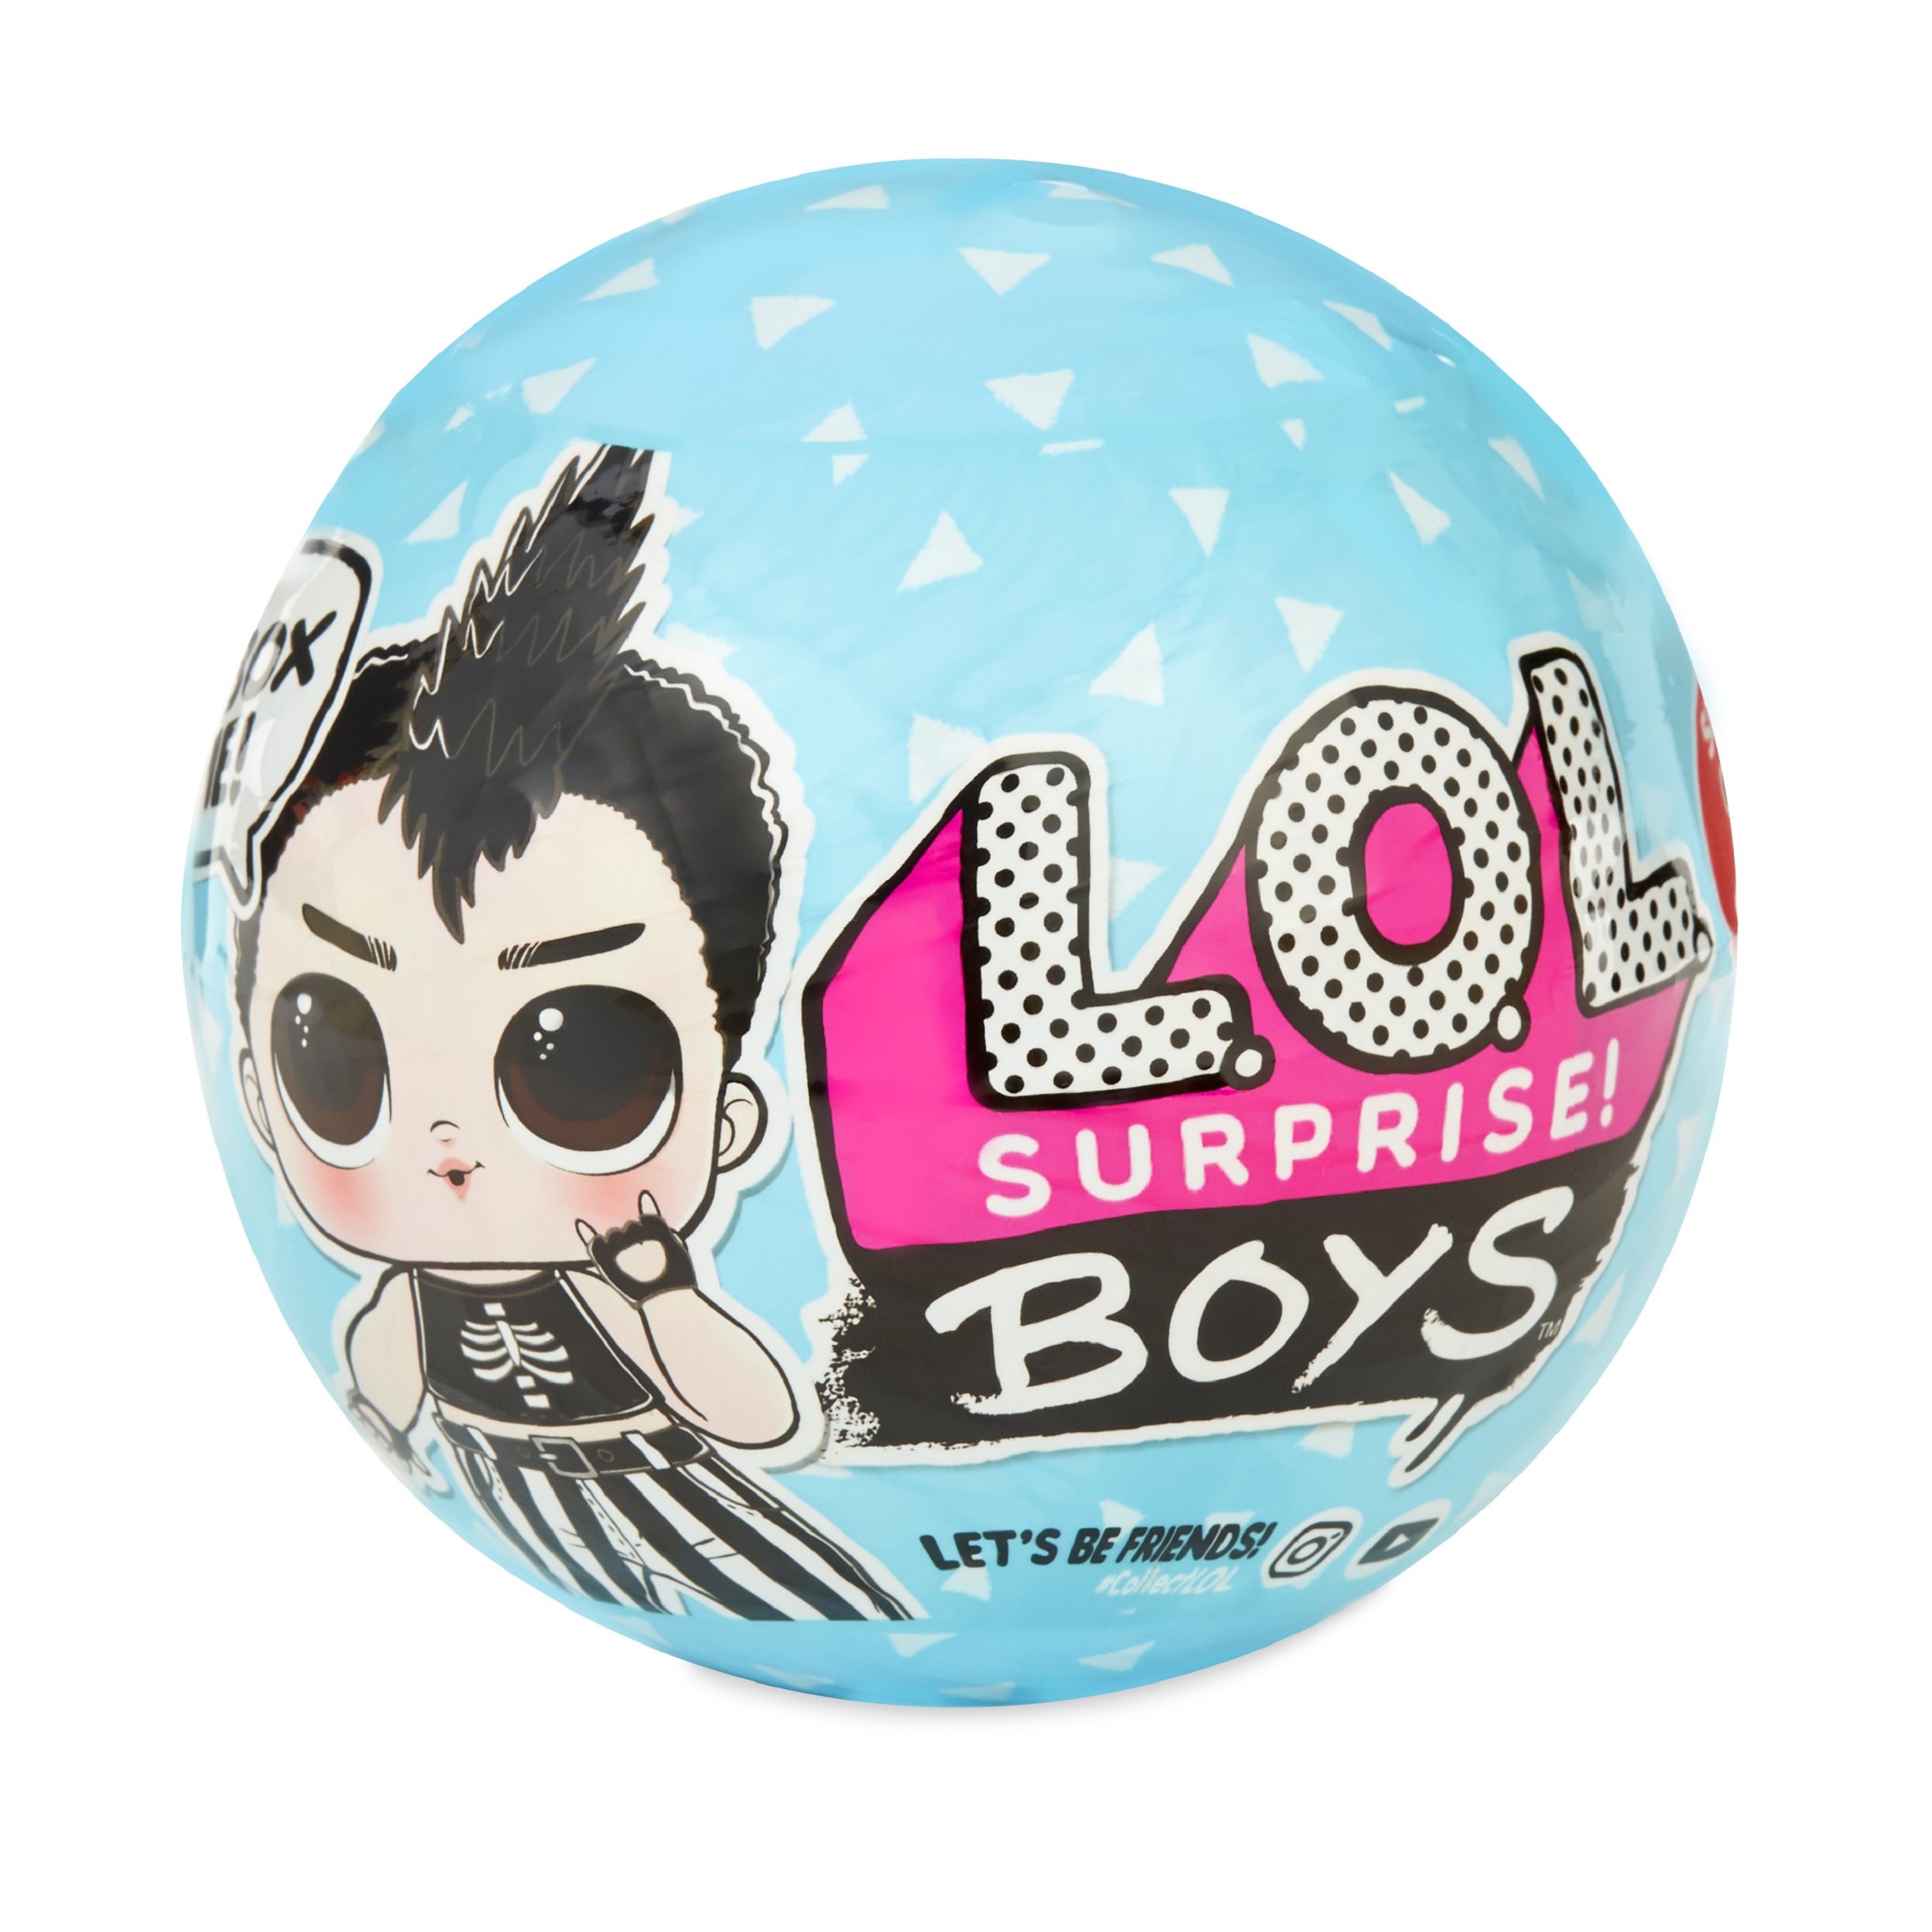 L.O.L. Surprise! Boys Character Doll Series 1 with 7 Surprises